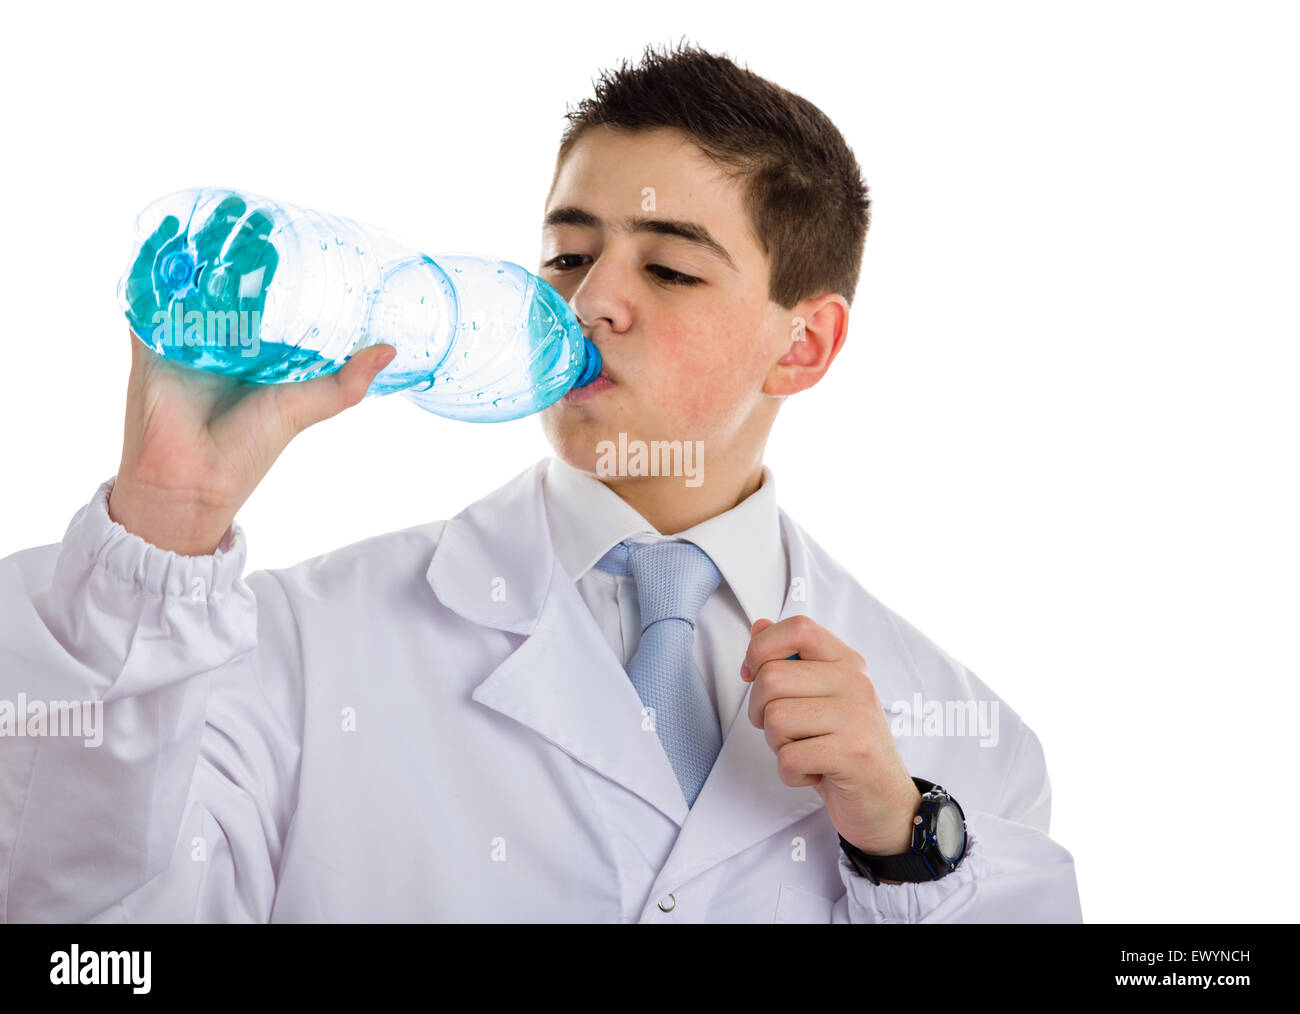 A boy doctor in blue tie and white coat with black digital watch drinking water from plastic bottle. His acne skin has not ben retouched Stock Photo